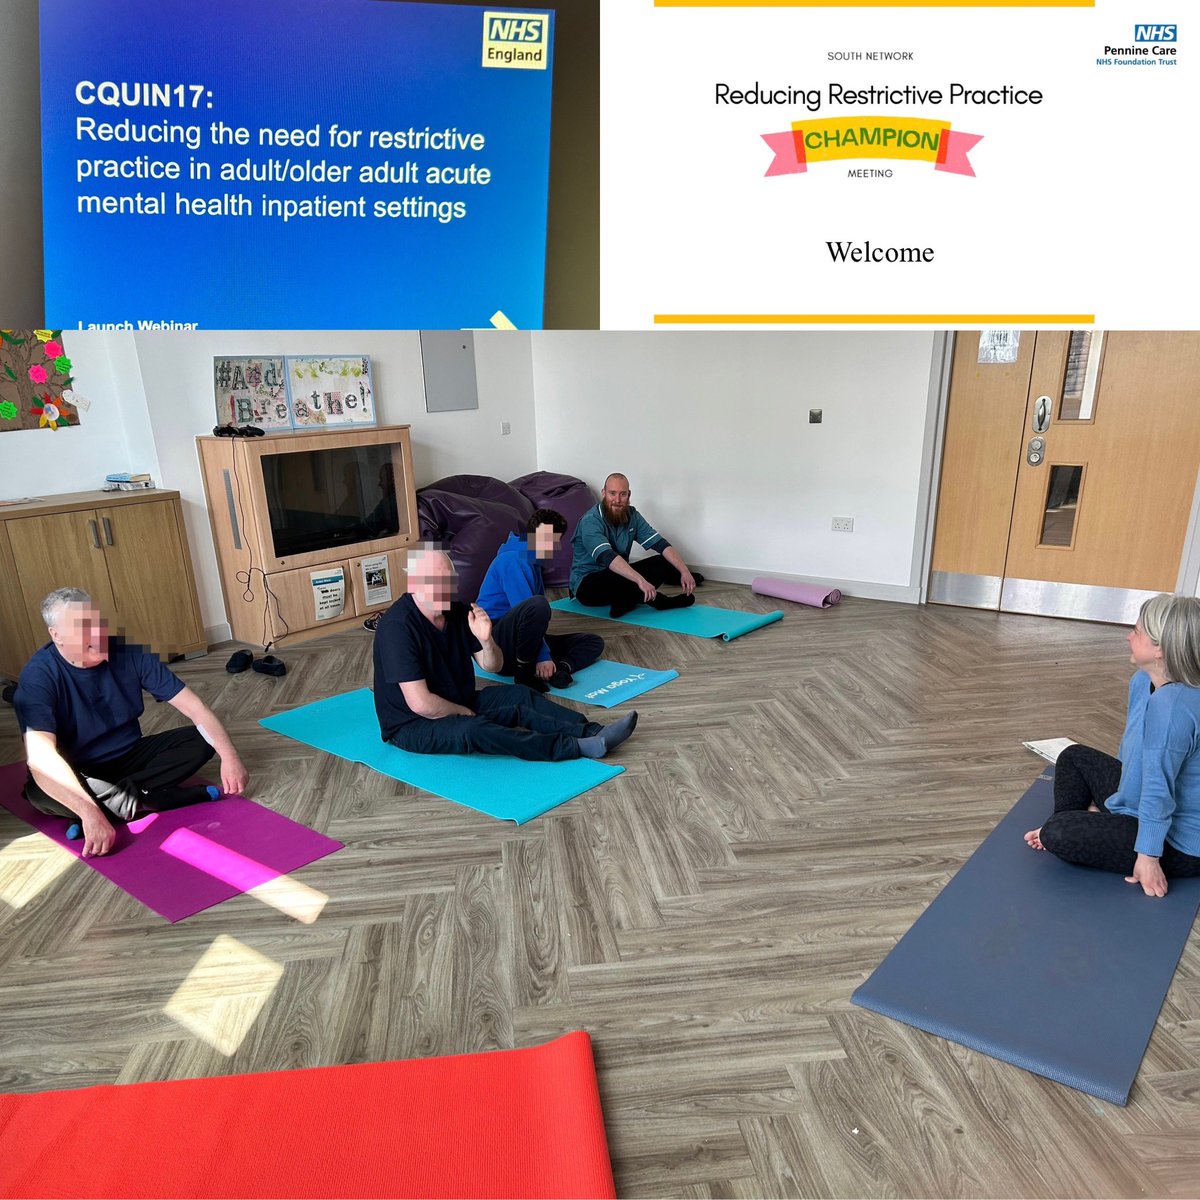 It’s been a great week filled with ideas of how to reduce restrictive practice- 
We had our first South Network Champions meeting 🏆, @maxineldunn @JamesyRs3 @Sharron_Amri & I met to discuss @Safewards implementation & I finally got to do some Yoga 🧘🏻‍♀️with #TeamArden @sodelafo